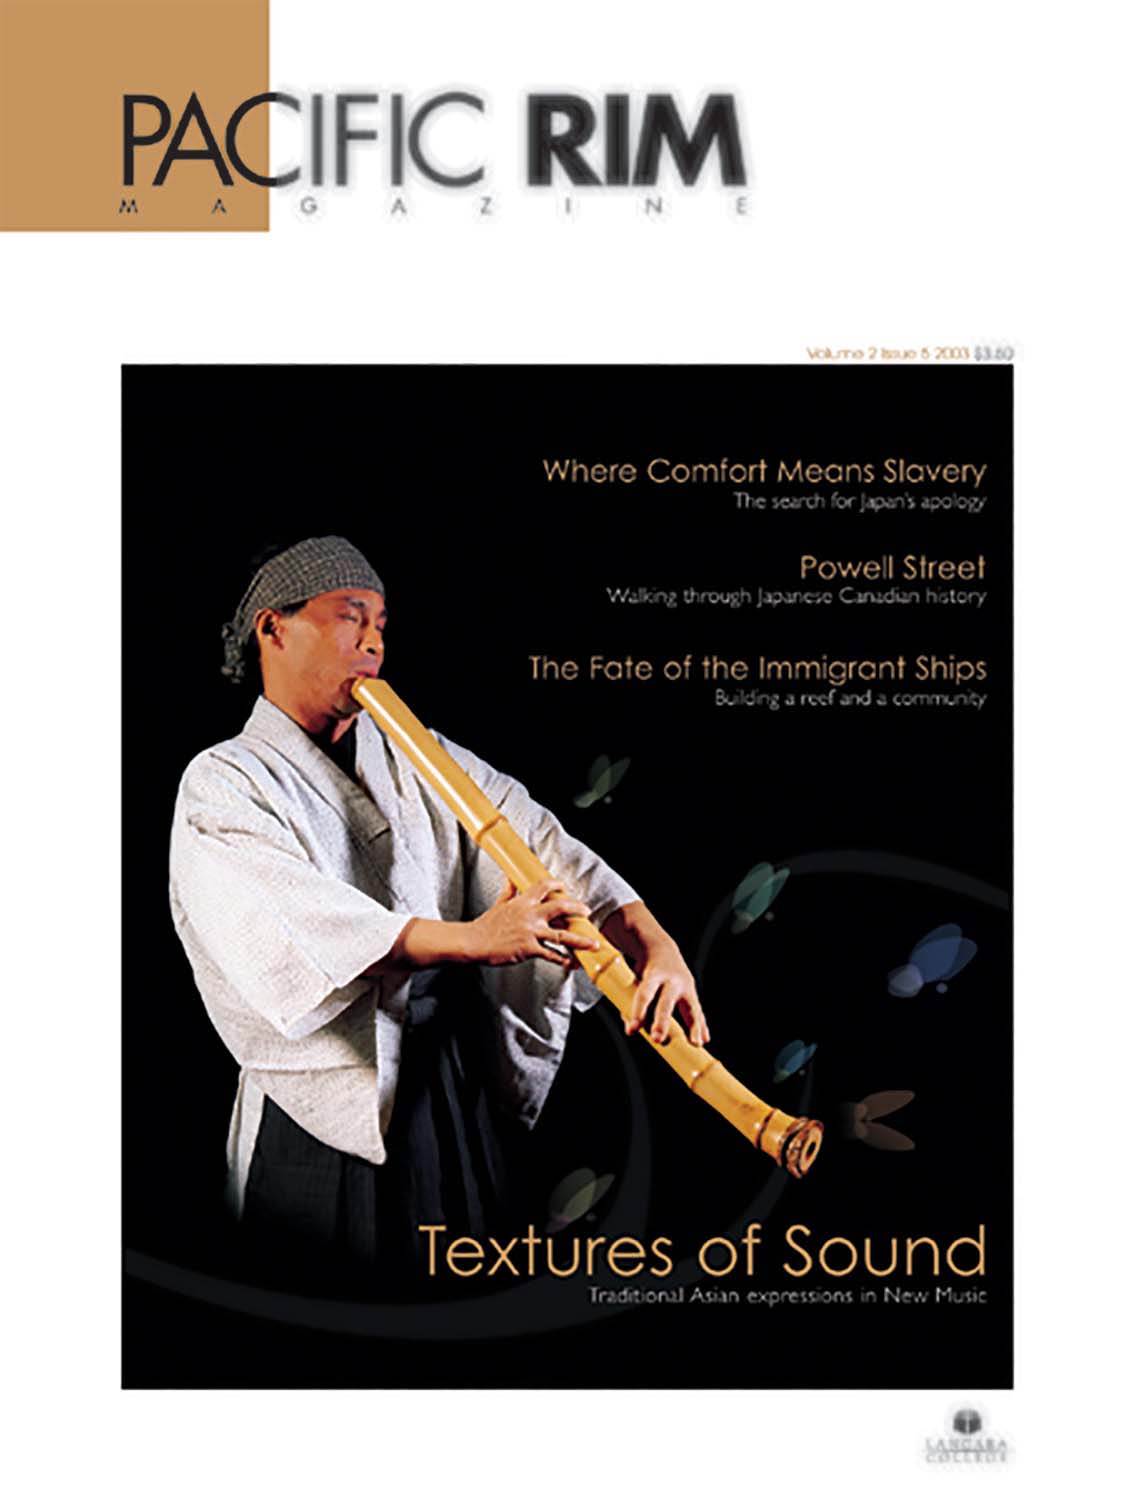 2003 Pacific Rim Cover. "Textures of Sound." Cover Story. Image of man playing instrument.